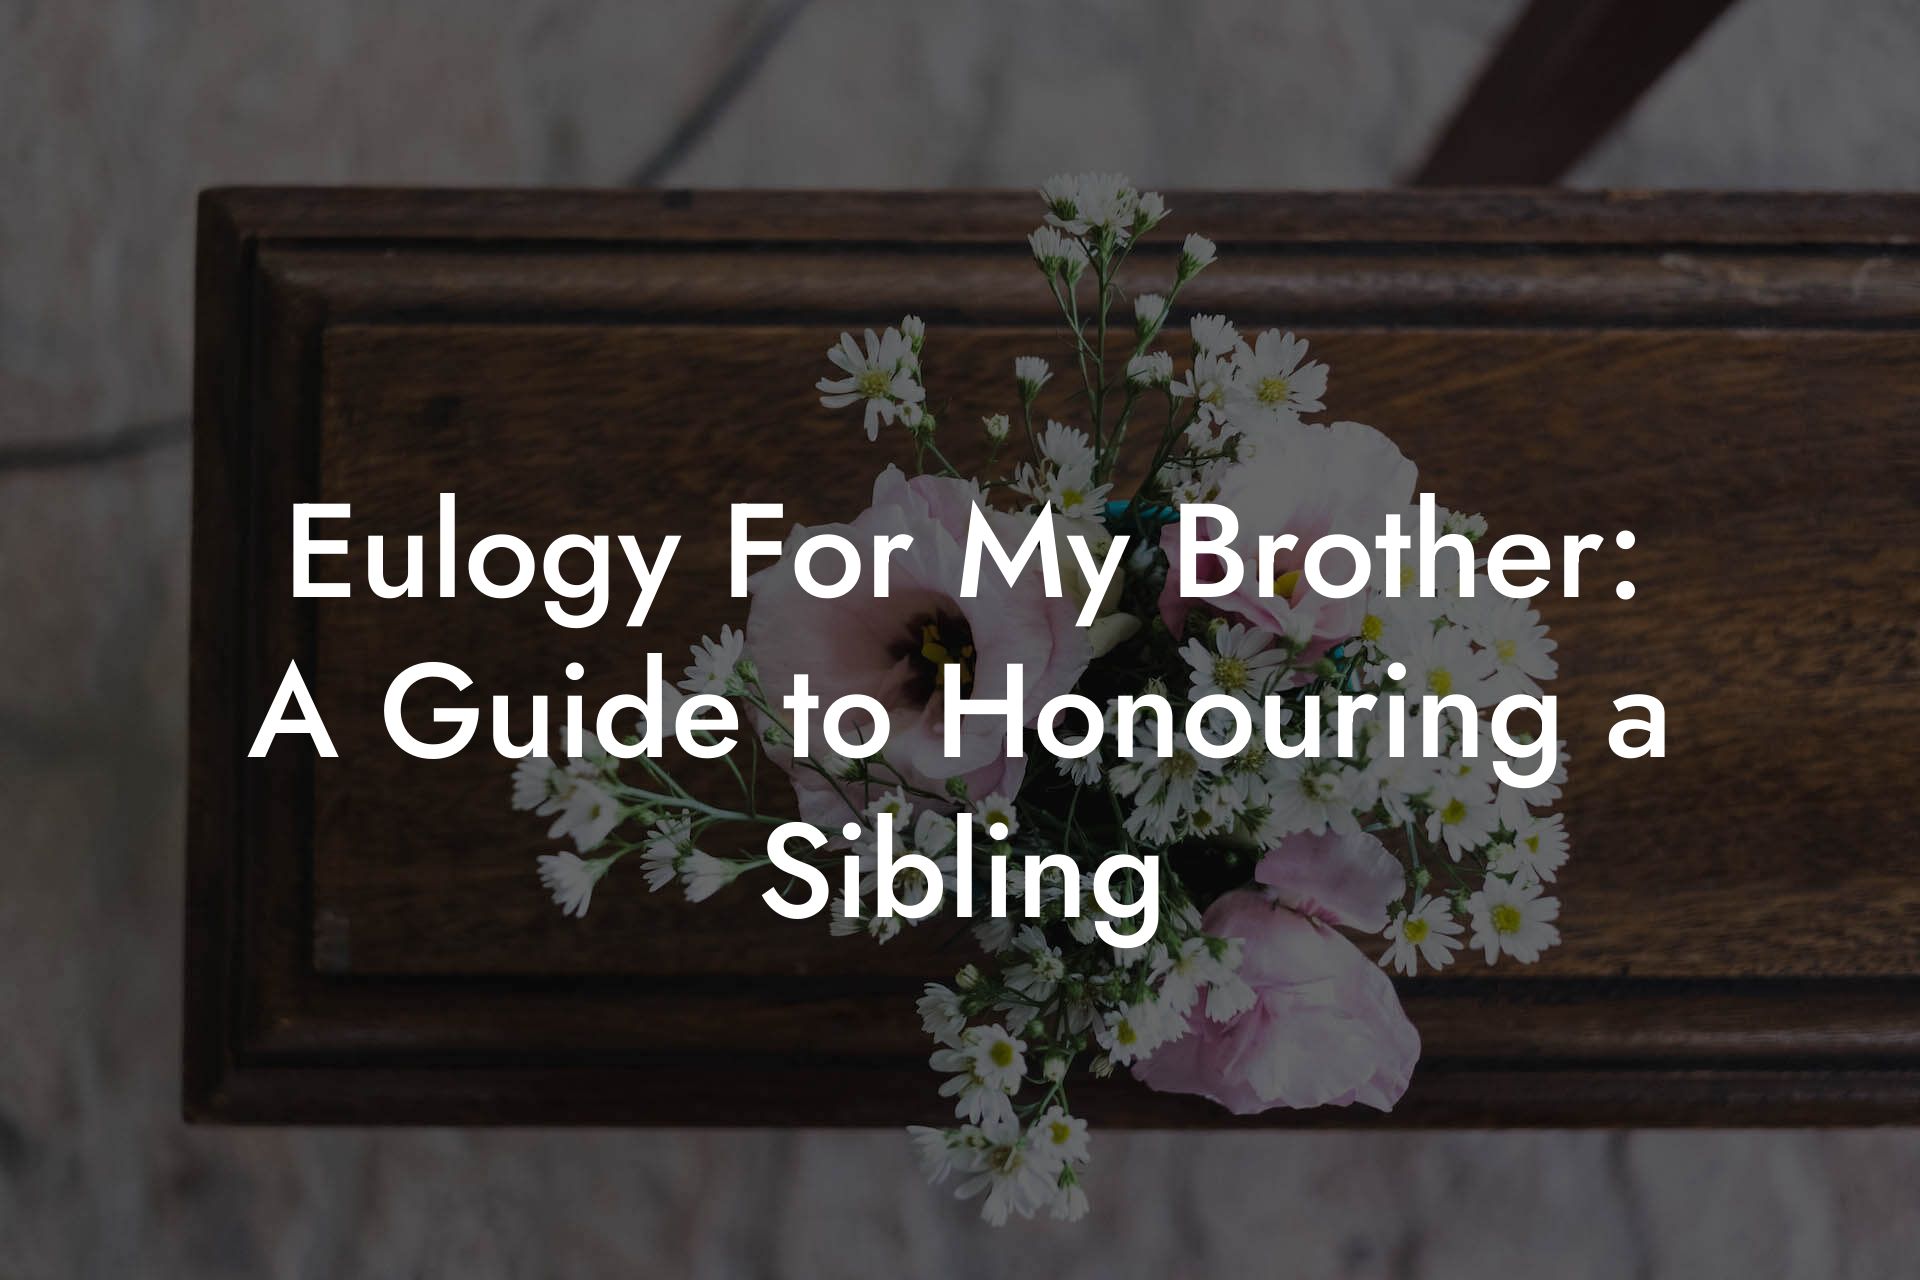 Eulogy For My Brother: A Guide to Honouring a Sibling